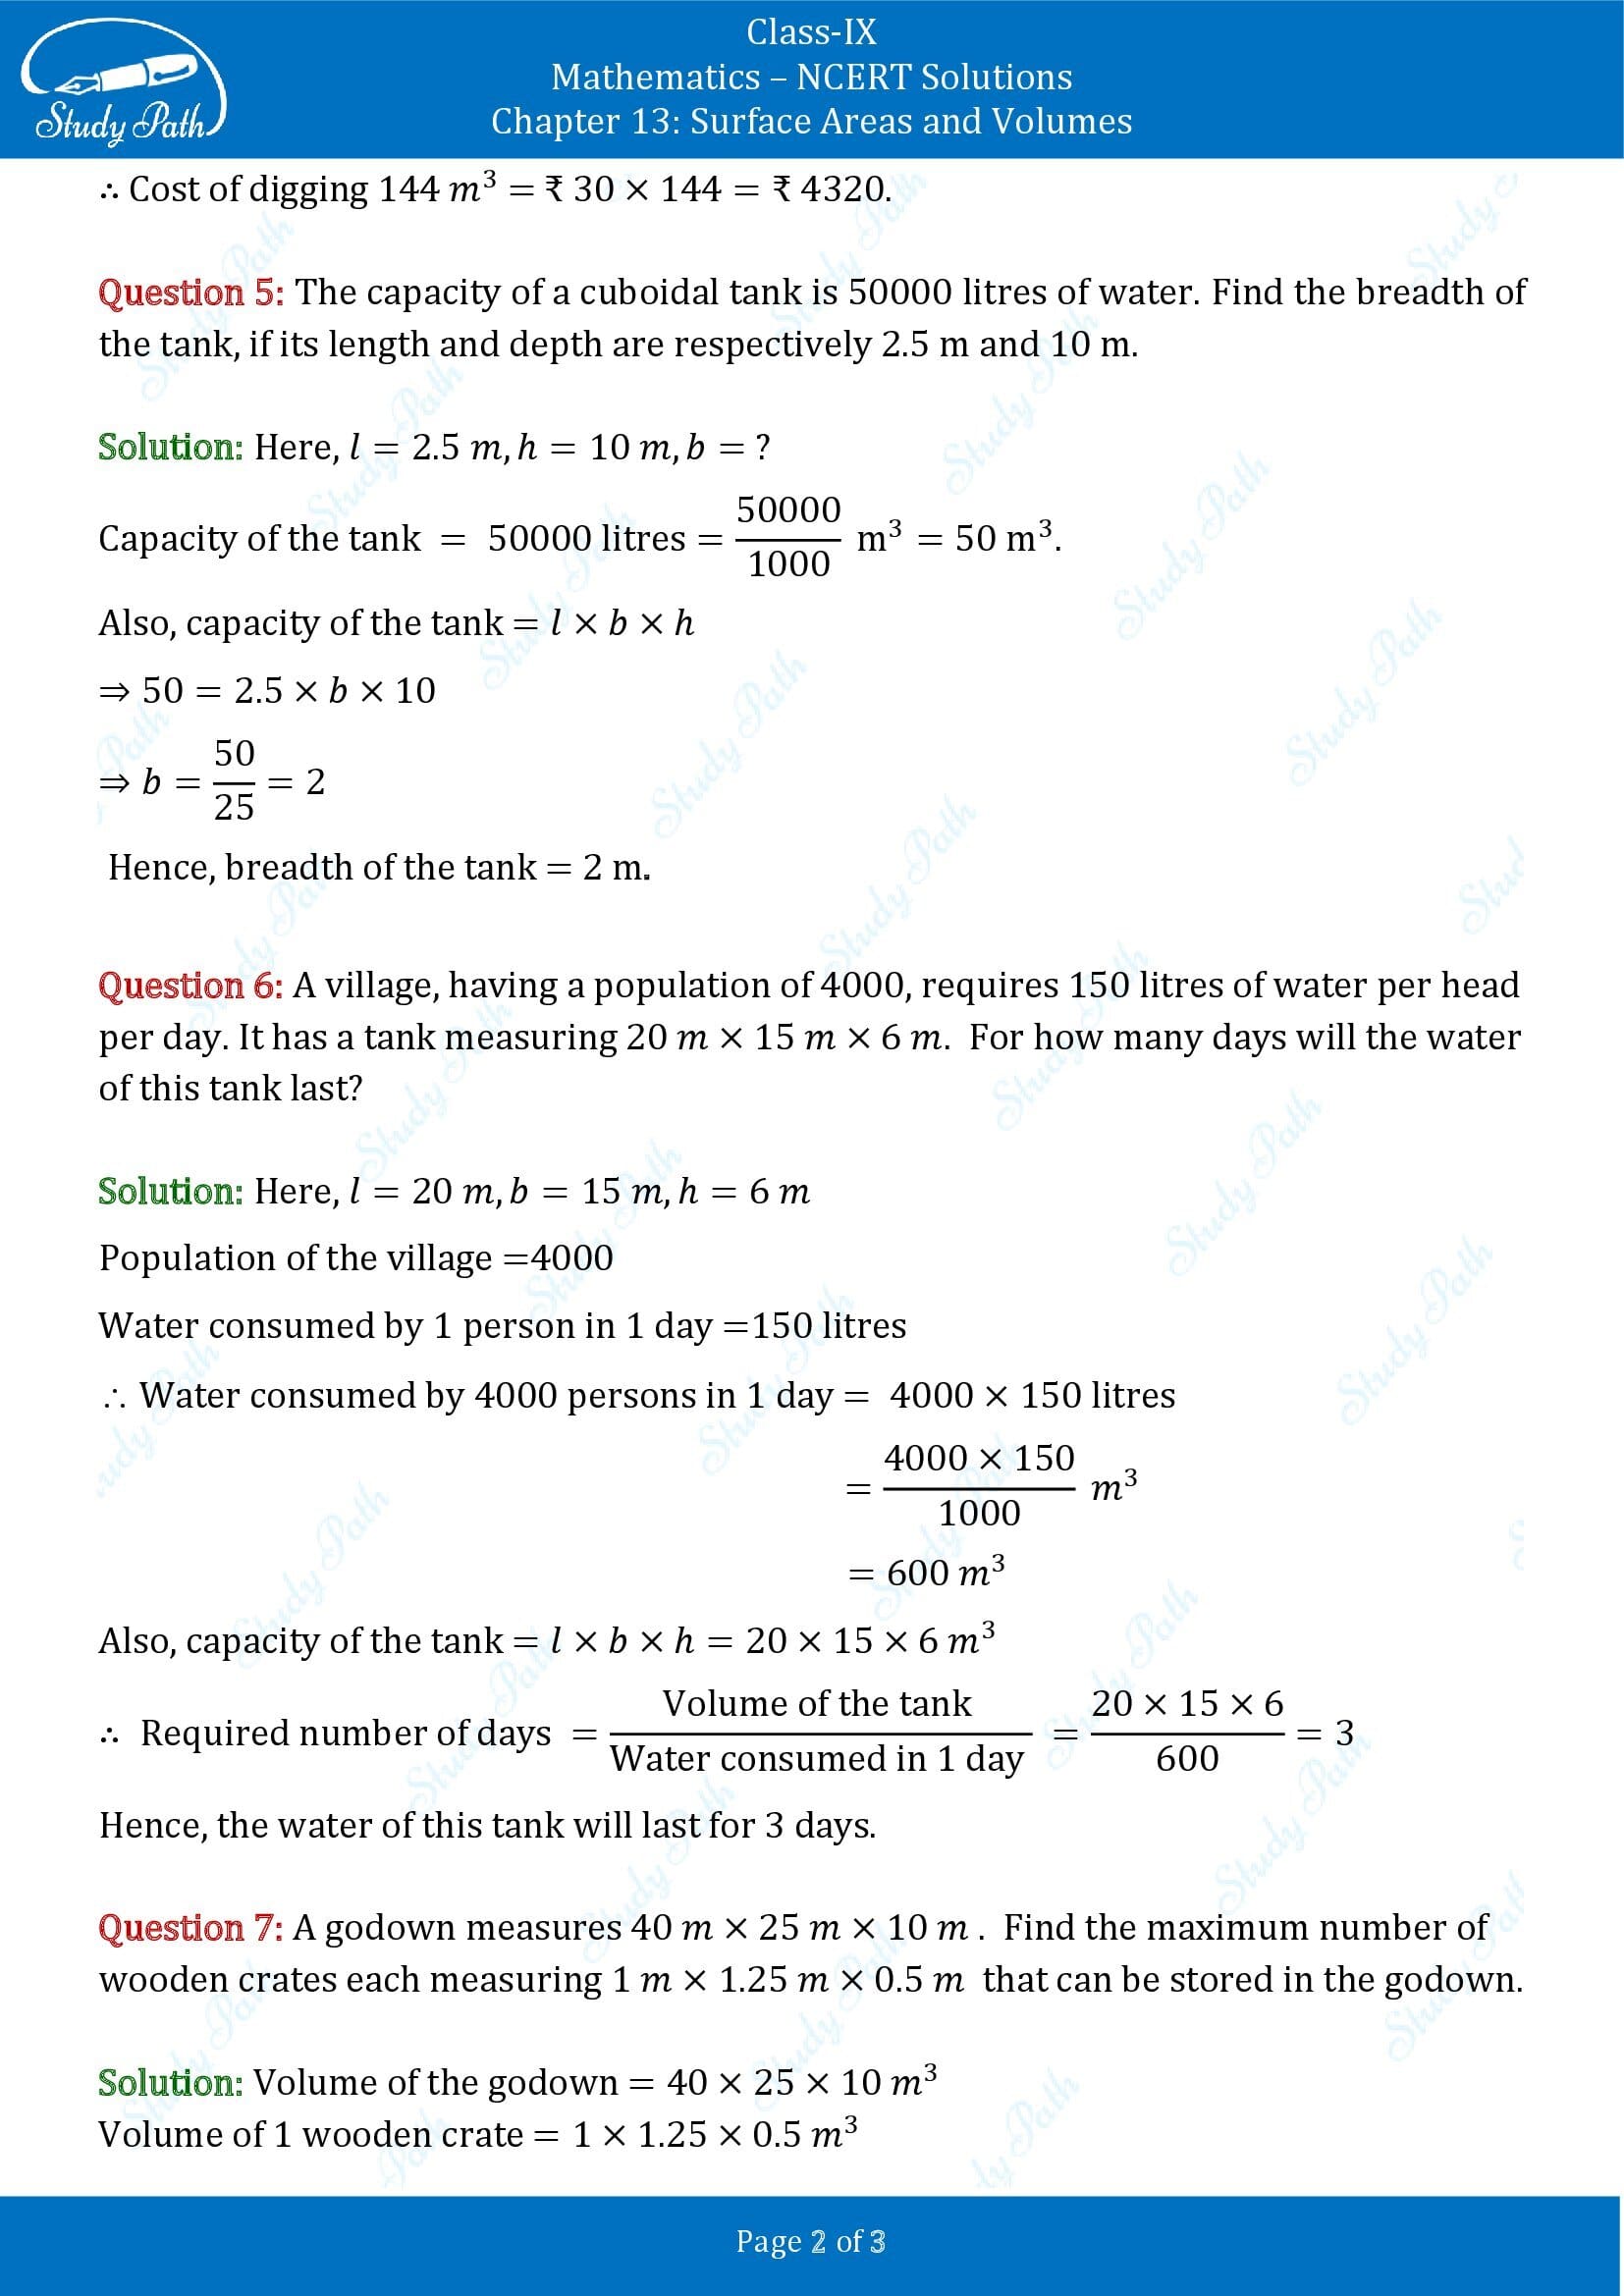 NCERT Solutions for Class 9 Maths Chapter 13 Surface Areas and Volumes Exercise 13.5 00002